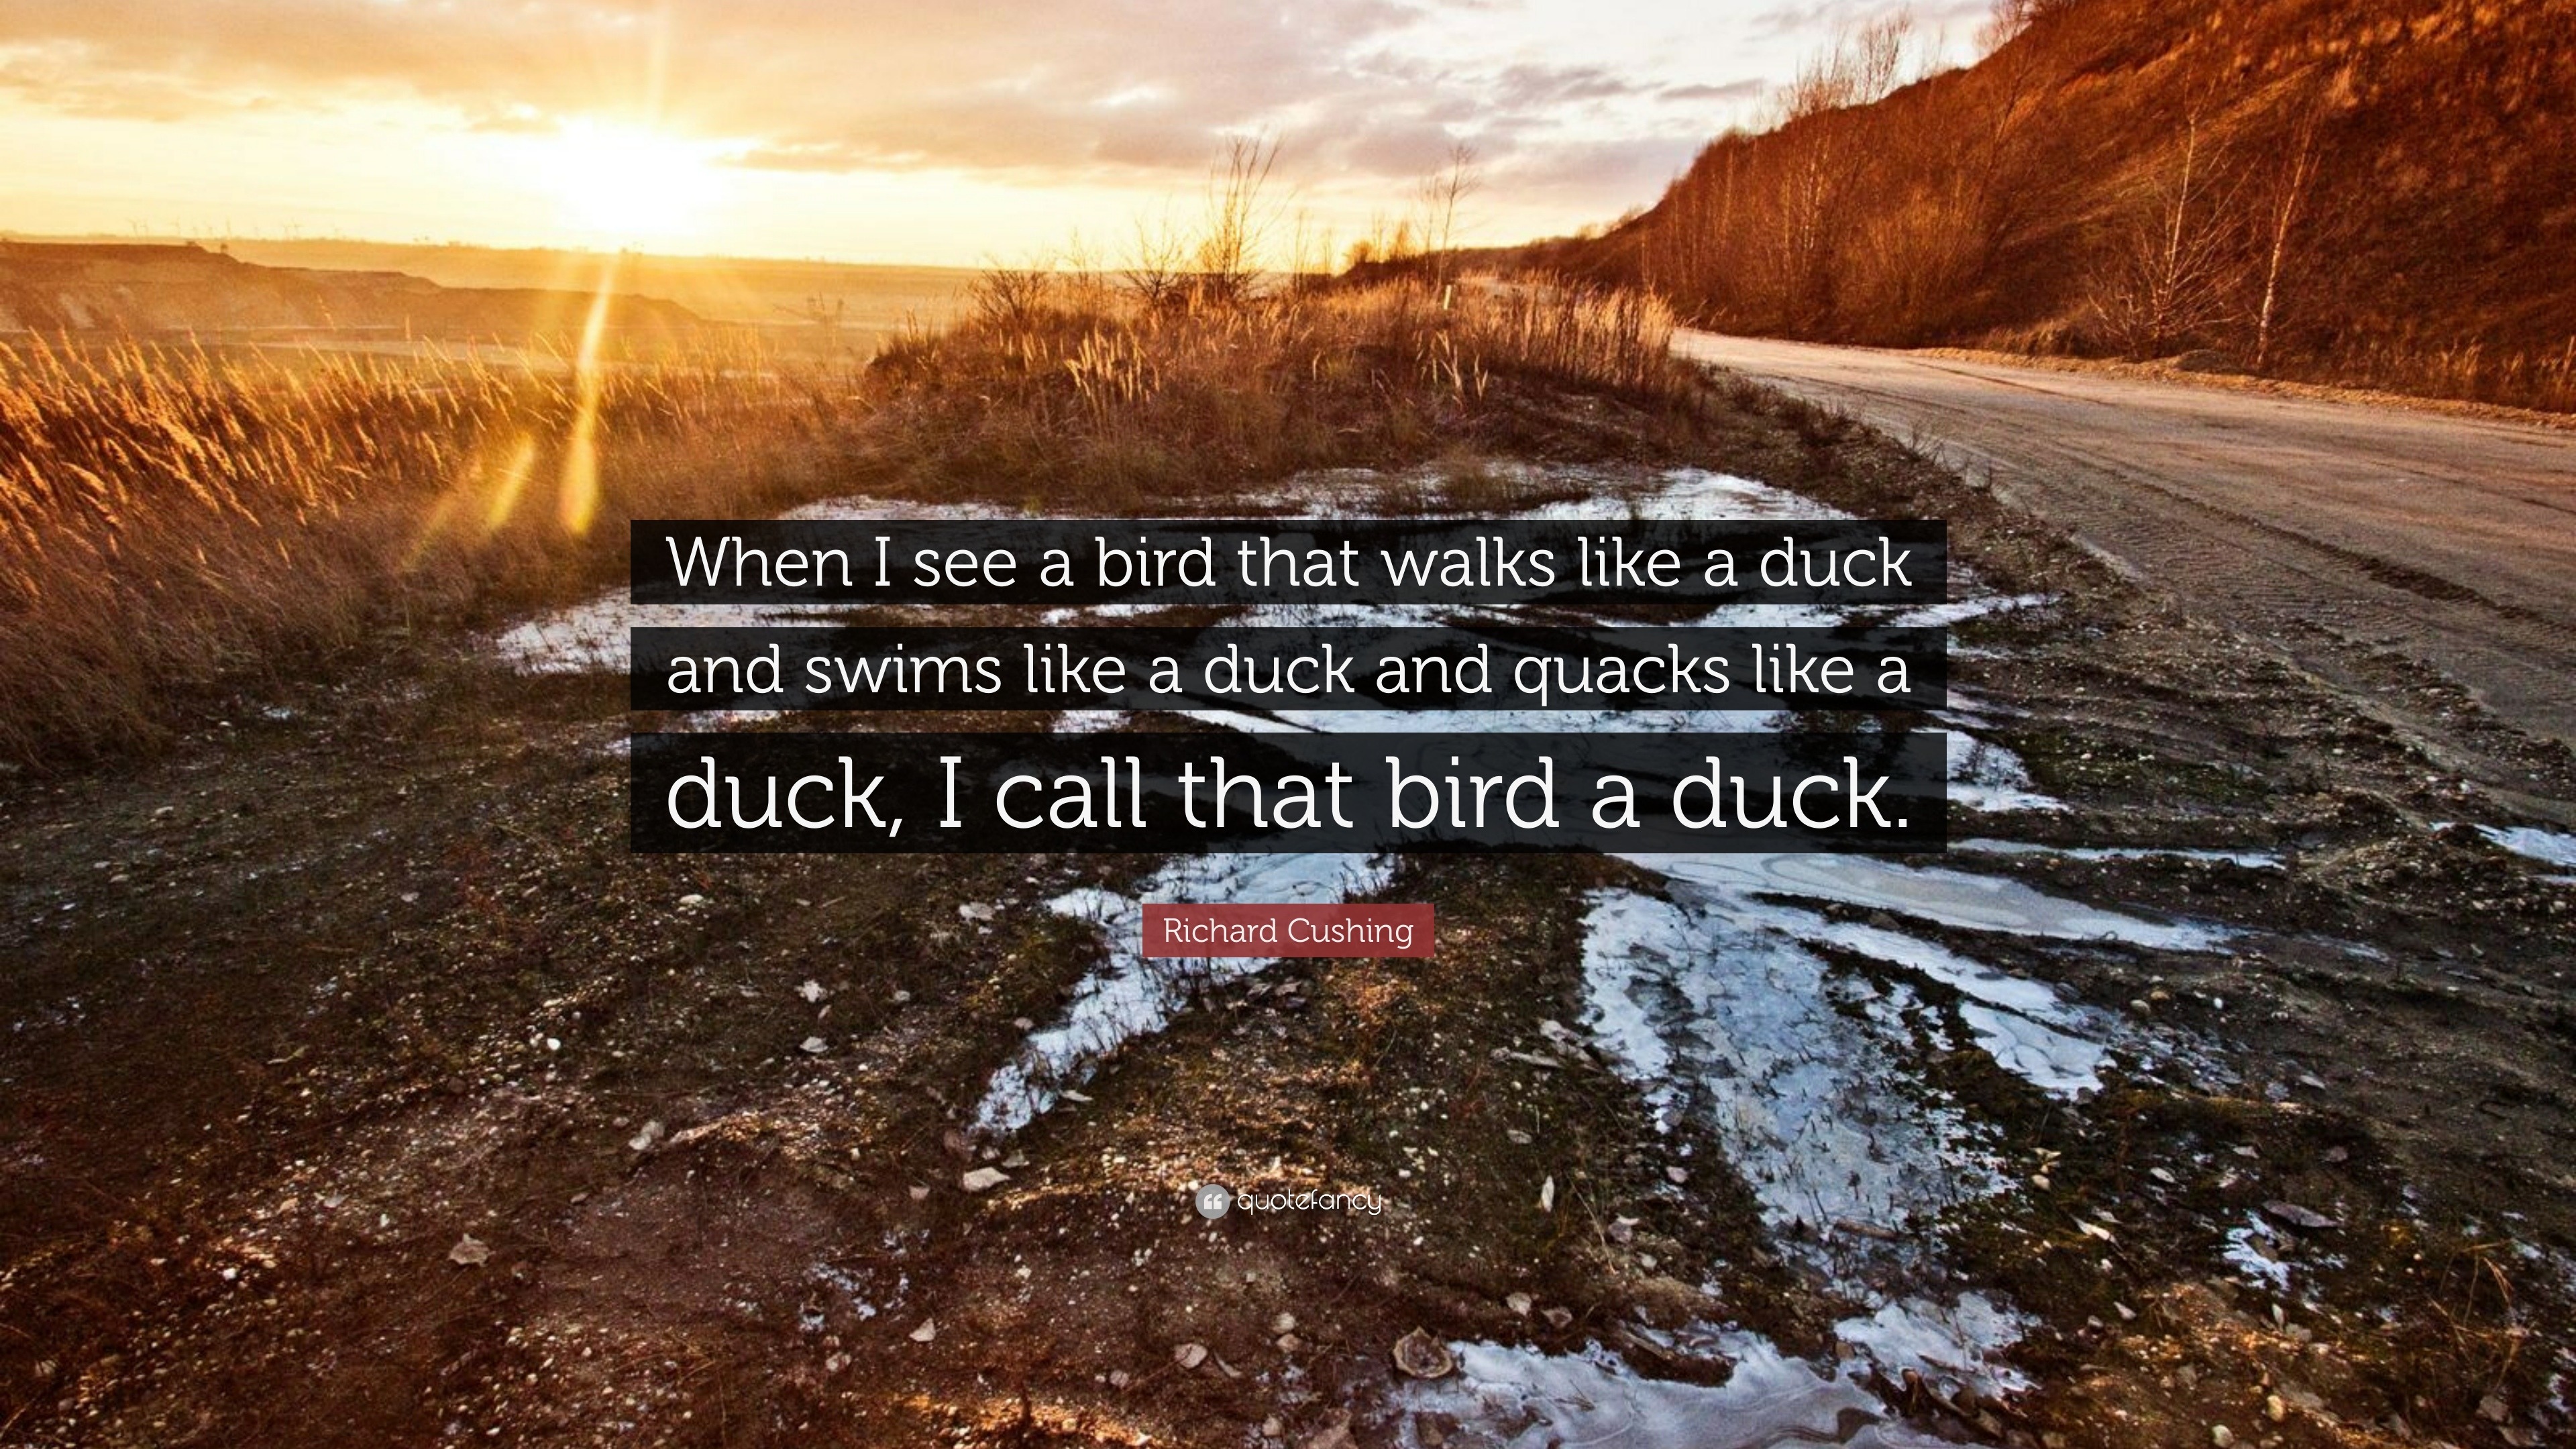 Richard Cushing Quote “When I see a bird that walks like a duck and